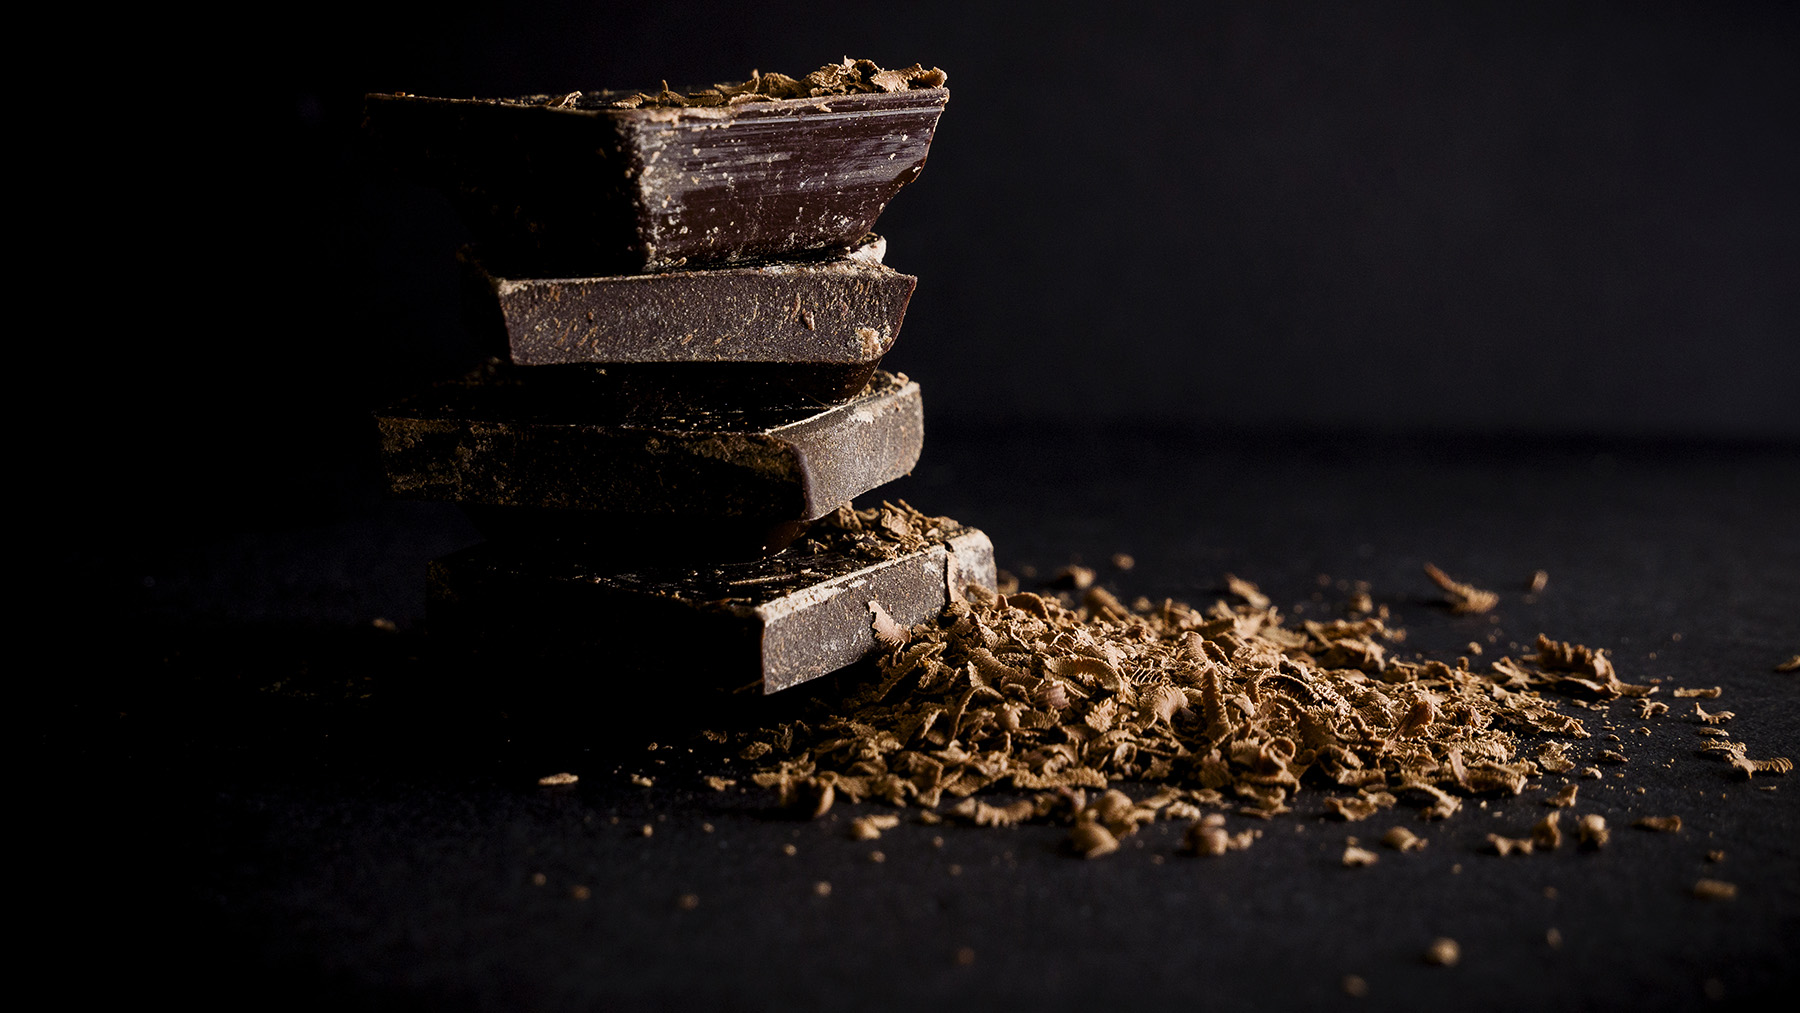 Photo of several small bars of chocolate and chocolate shavings on a dark background (Image from Wikimedia Commons, courtesy of RawPixel.com)